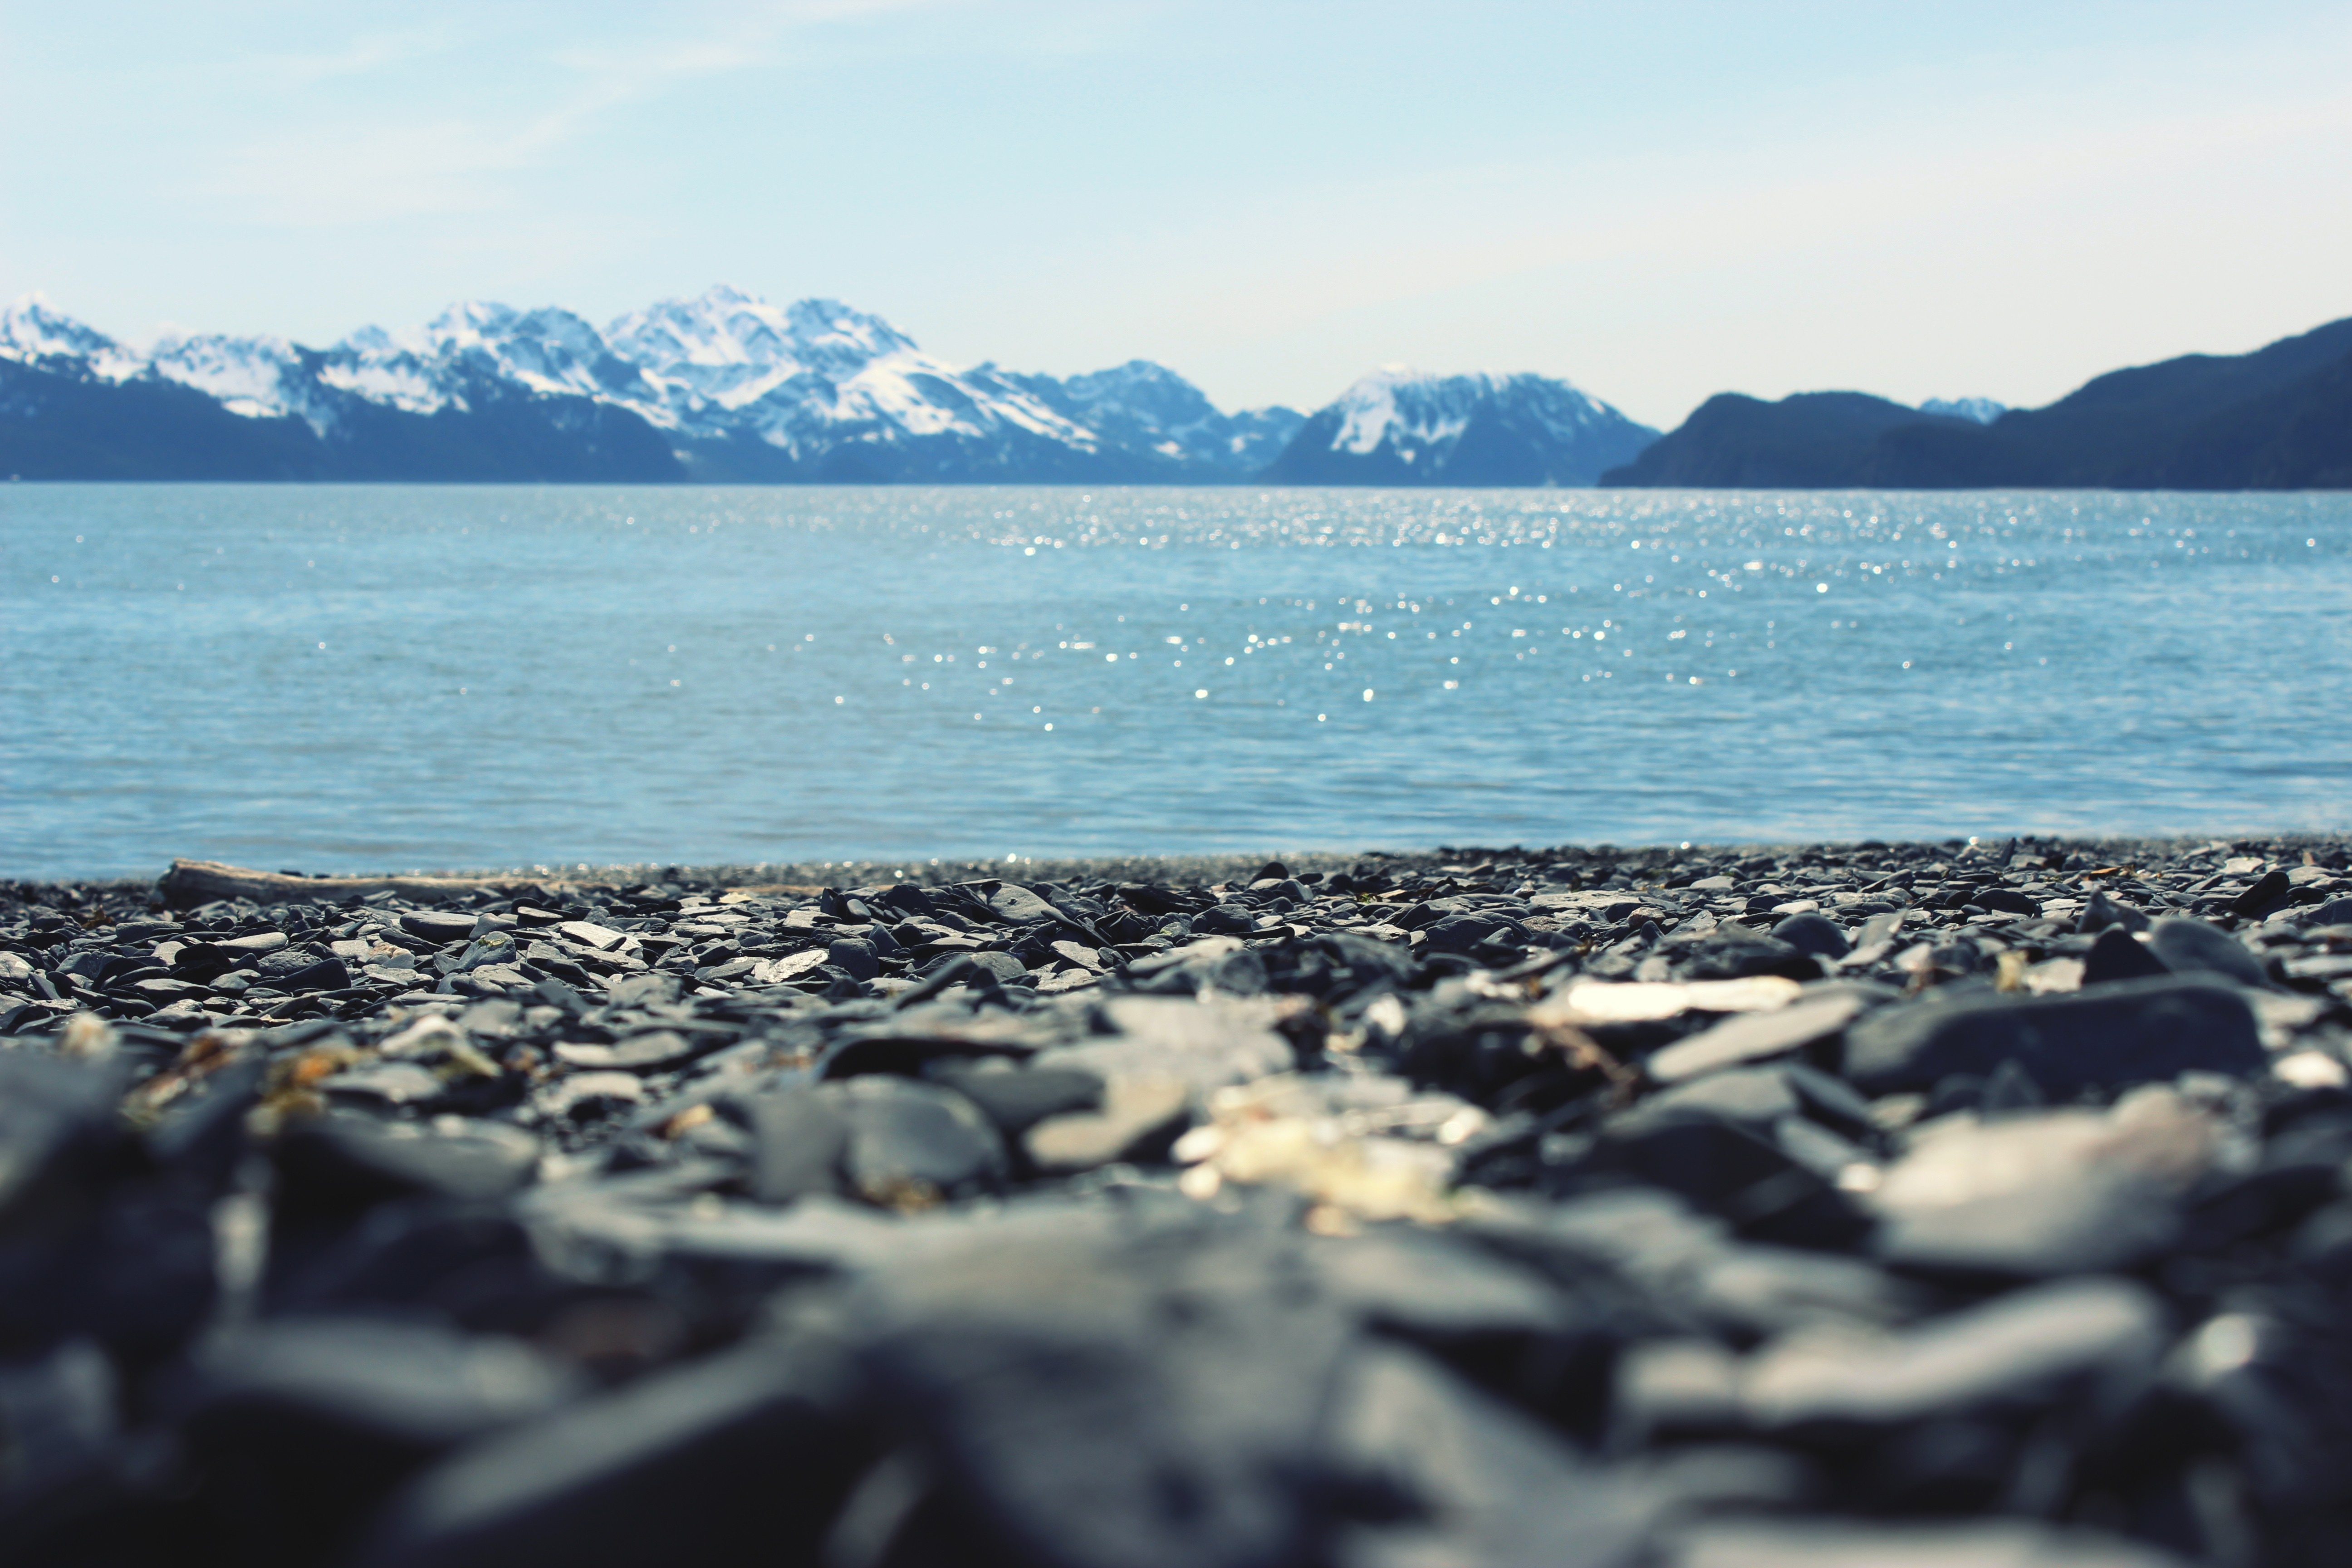 close photo of seashore near body of water and mountains free image ...